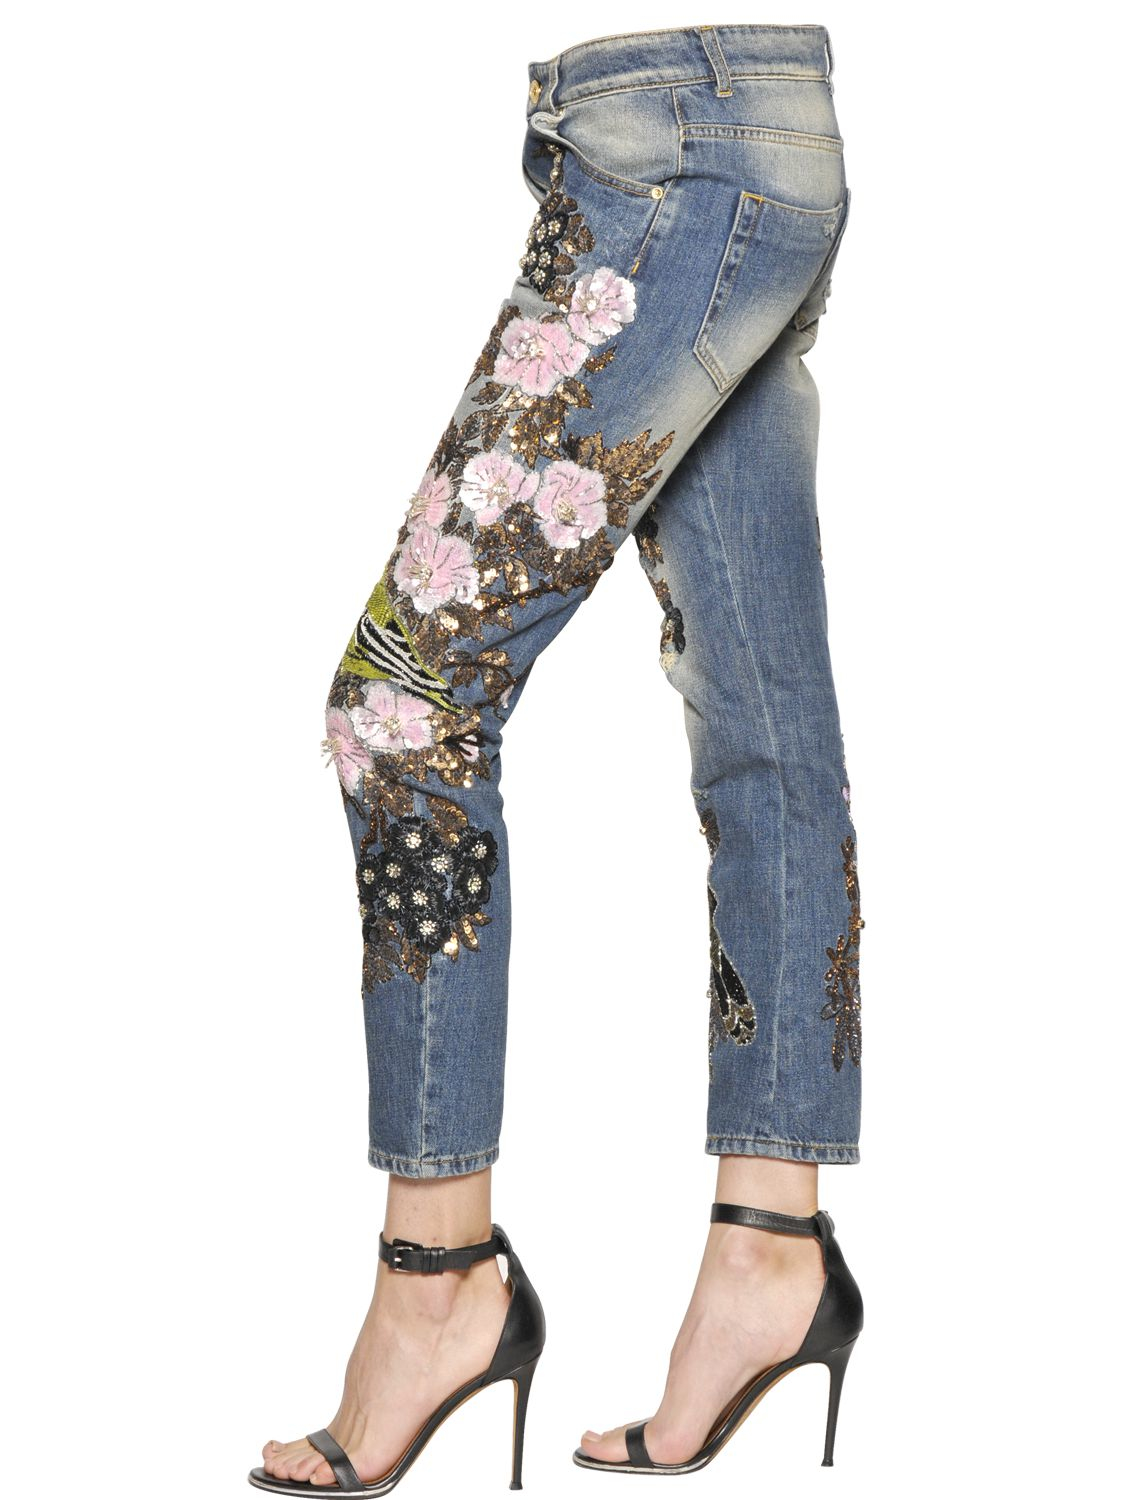 Lyst - Amen Couture Embellished Cotton Denim Jeans in Blue